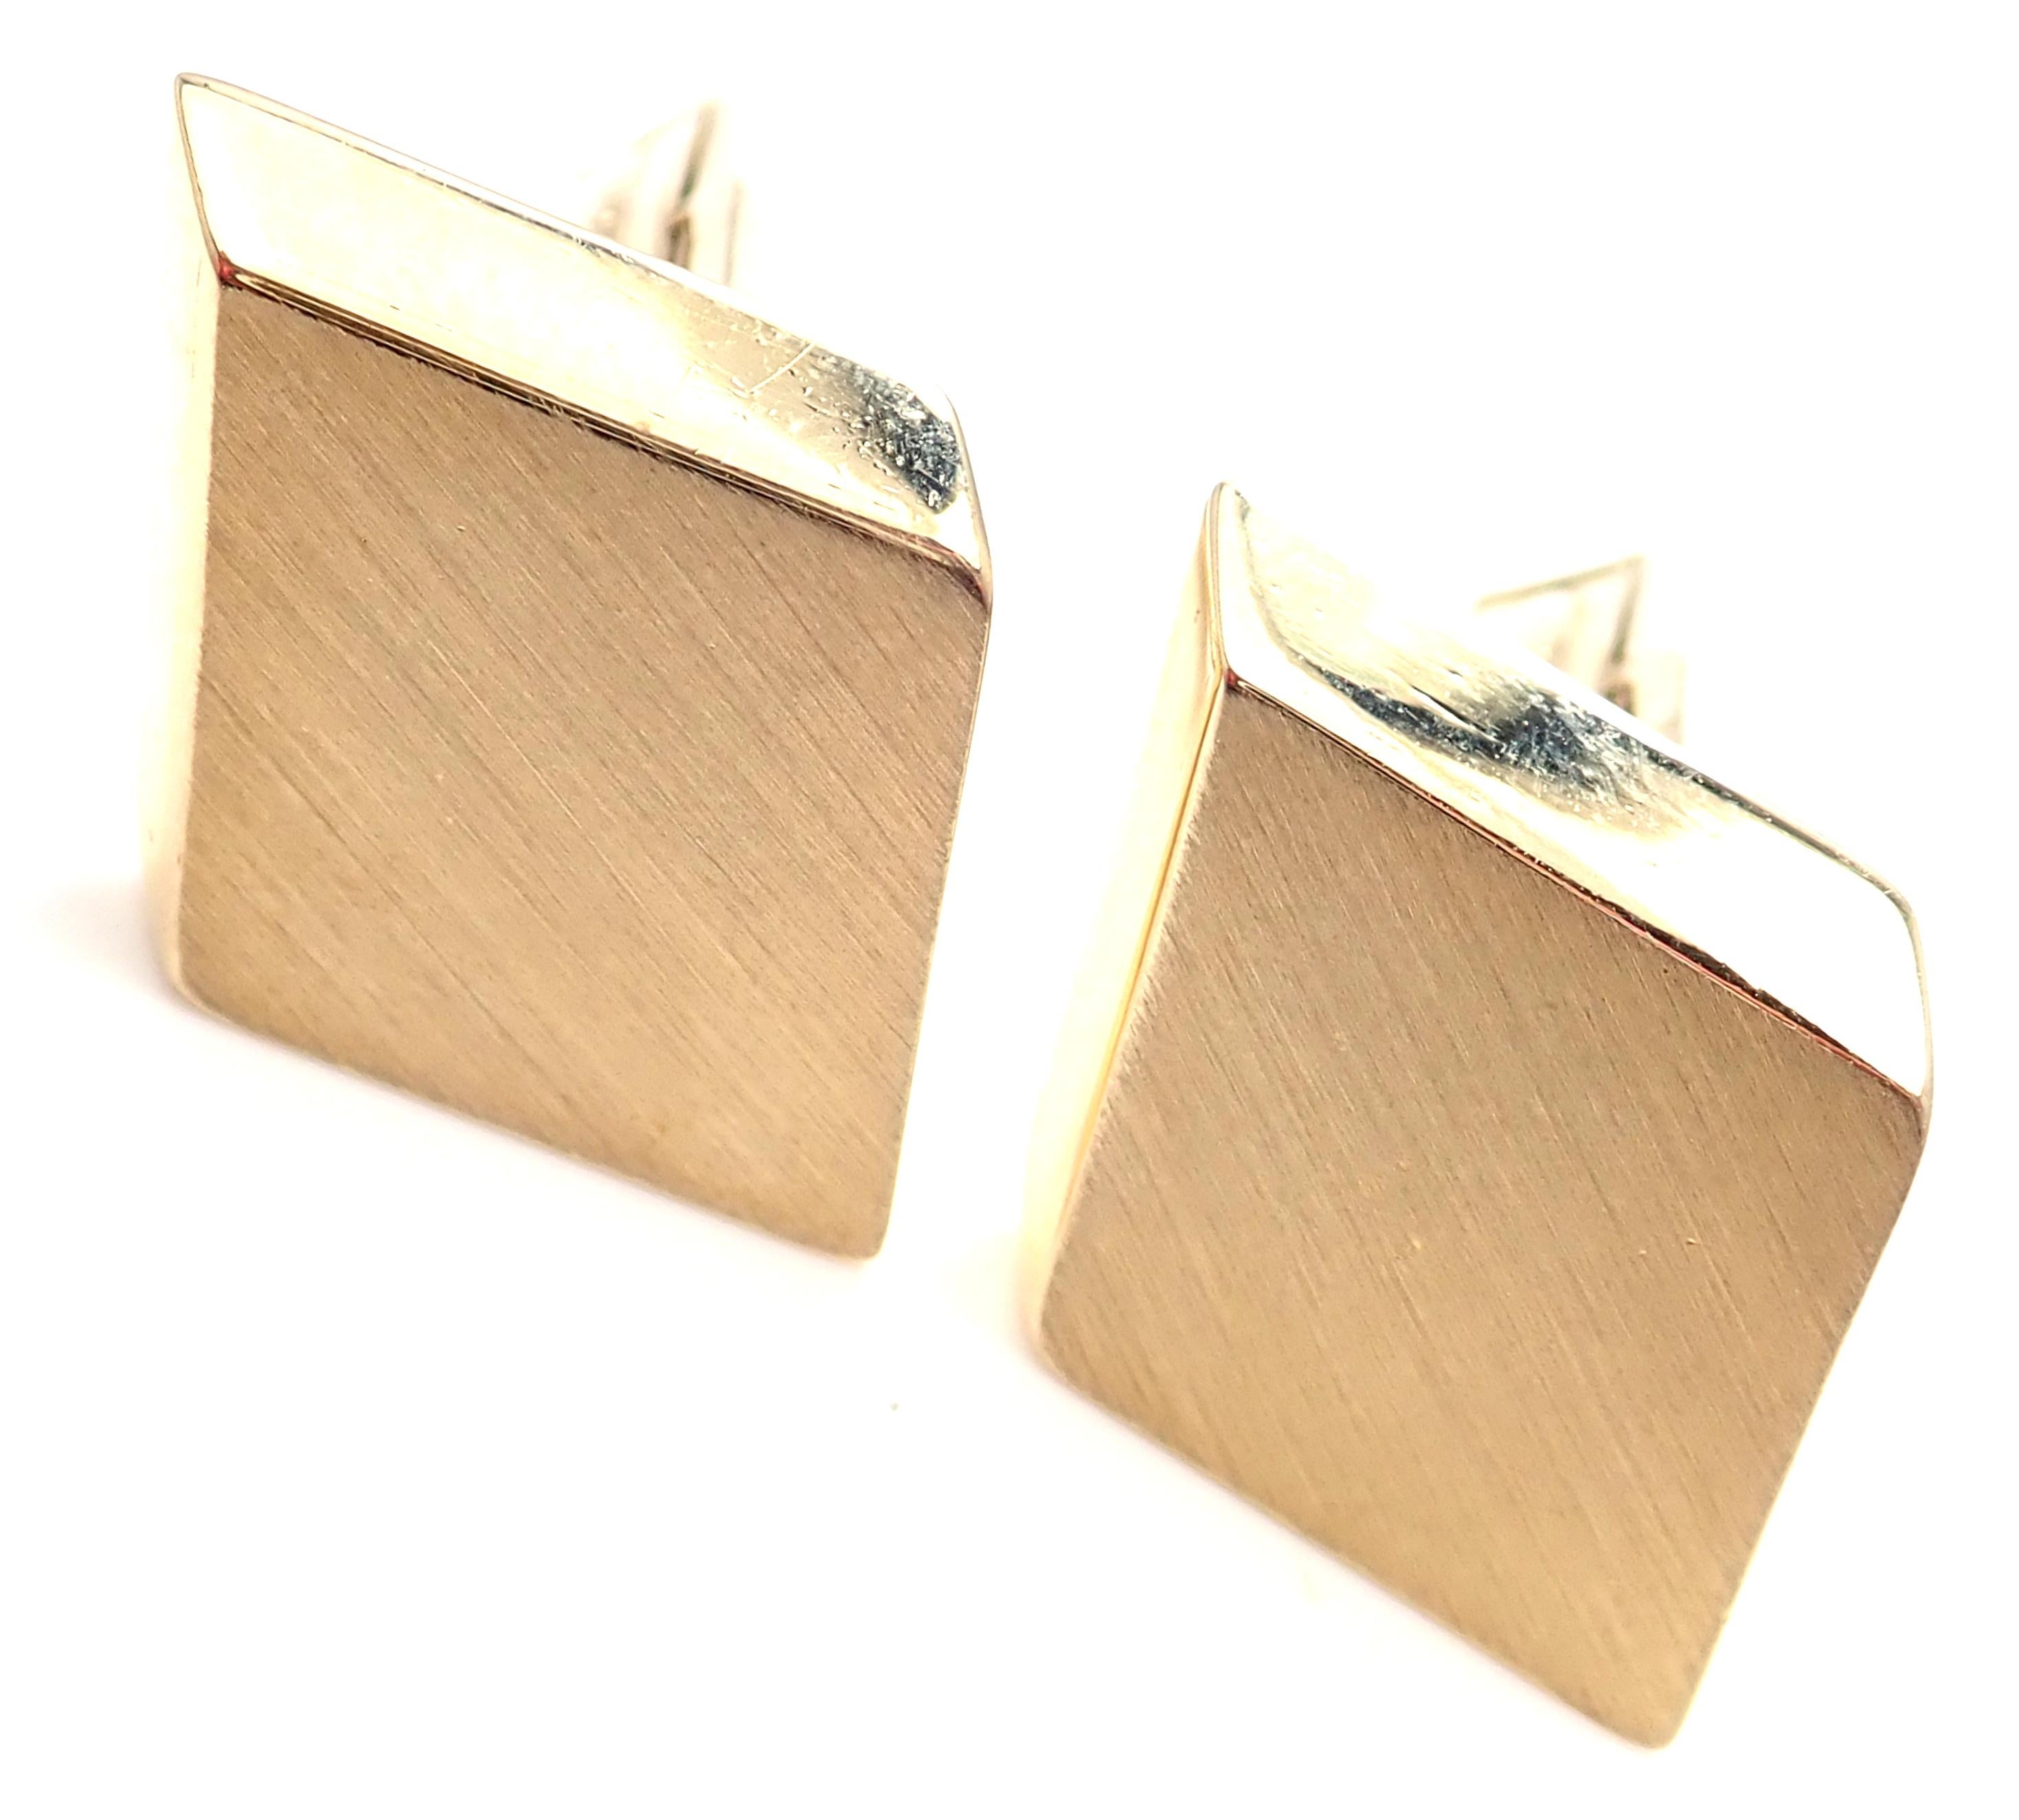 14k Yellow Gold Vintage Cufflinks by Tiffany & Co. 
Details: 
Measurements: 25mm x 18mm x 22mm
Weight: 11.3 grams
Stamped Hallmarks: Tiffany & Co. 14k 
*Free Shipping within the United States* 
YOUR PRICE: $1,500
T783hnd